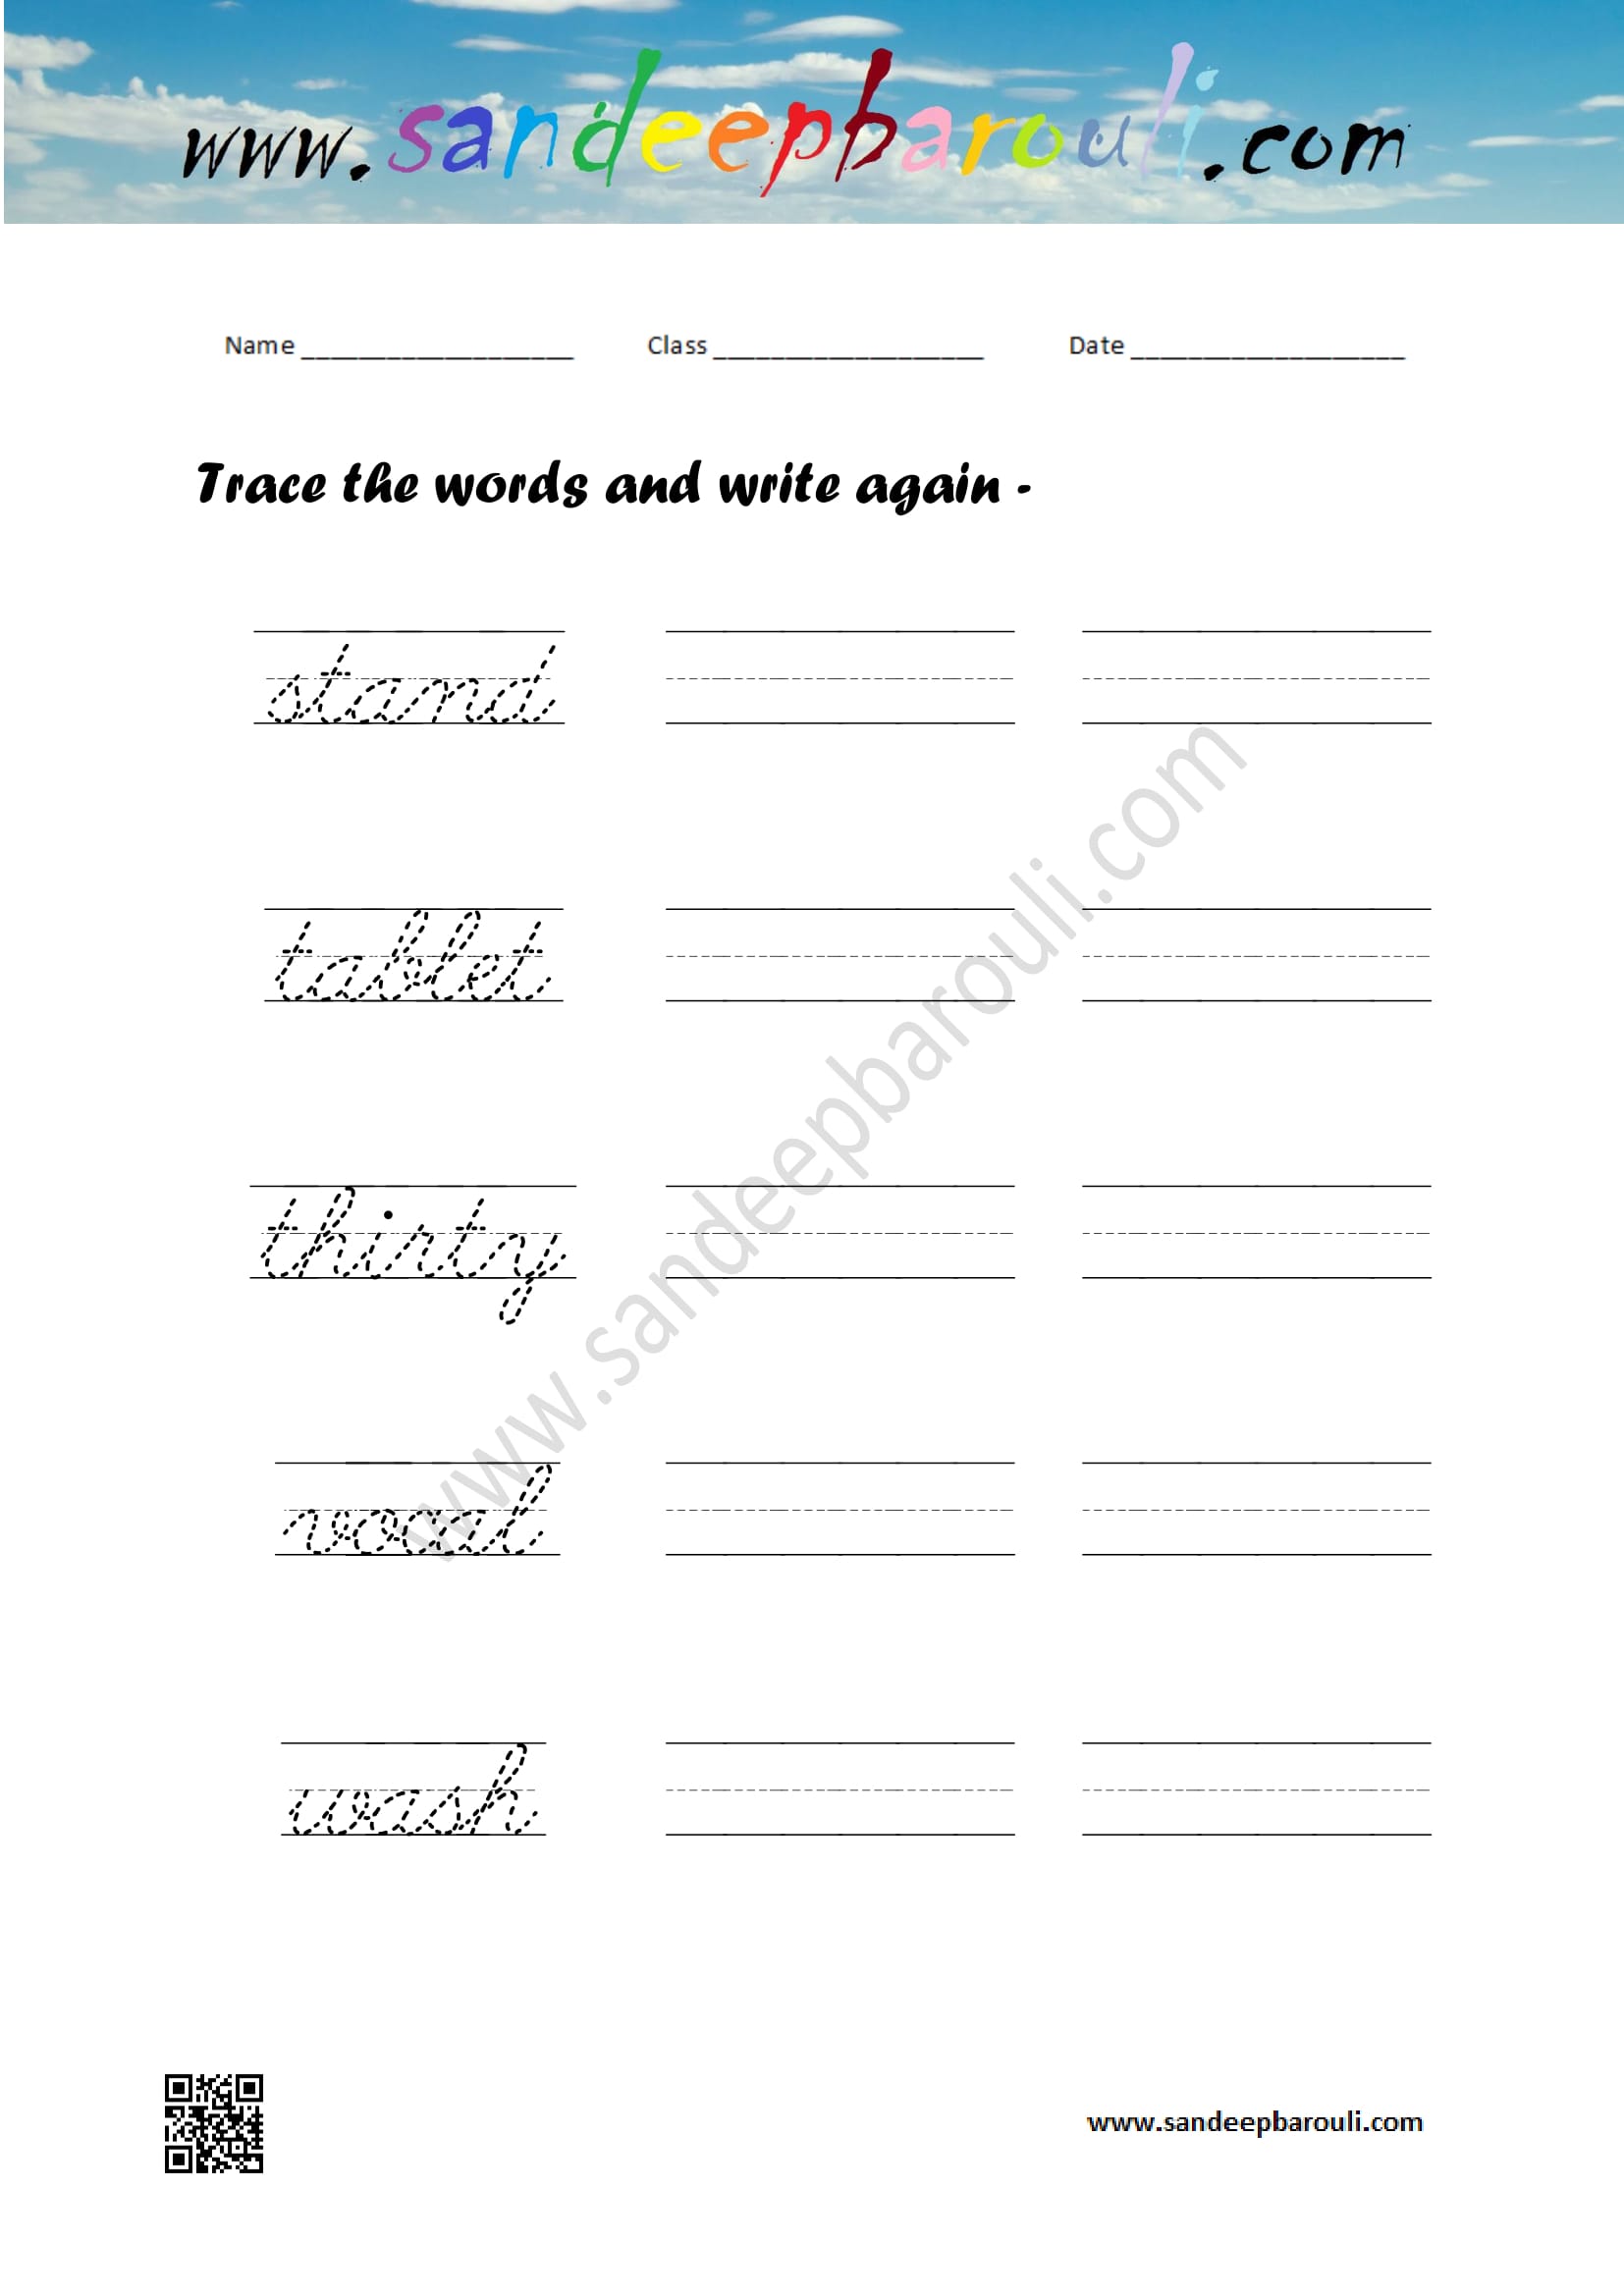 Cursive writing worksheet – trace the words and write again (86)